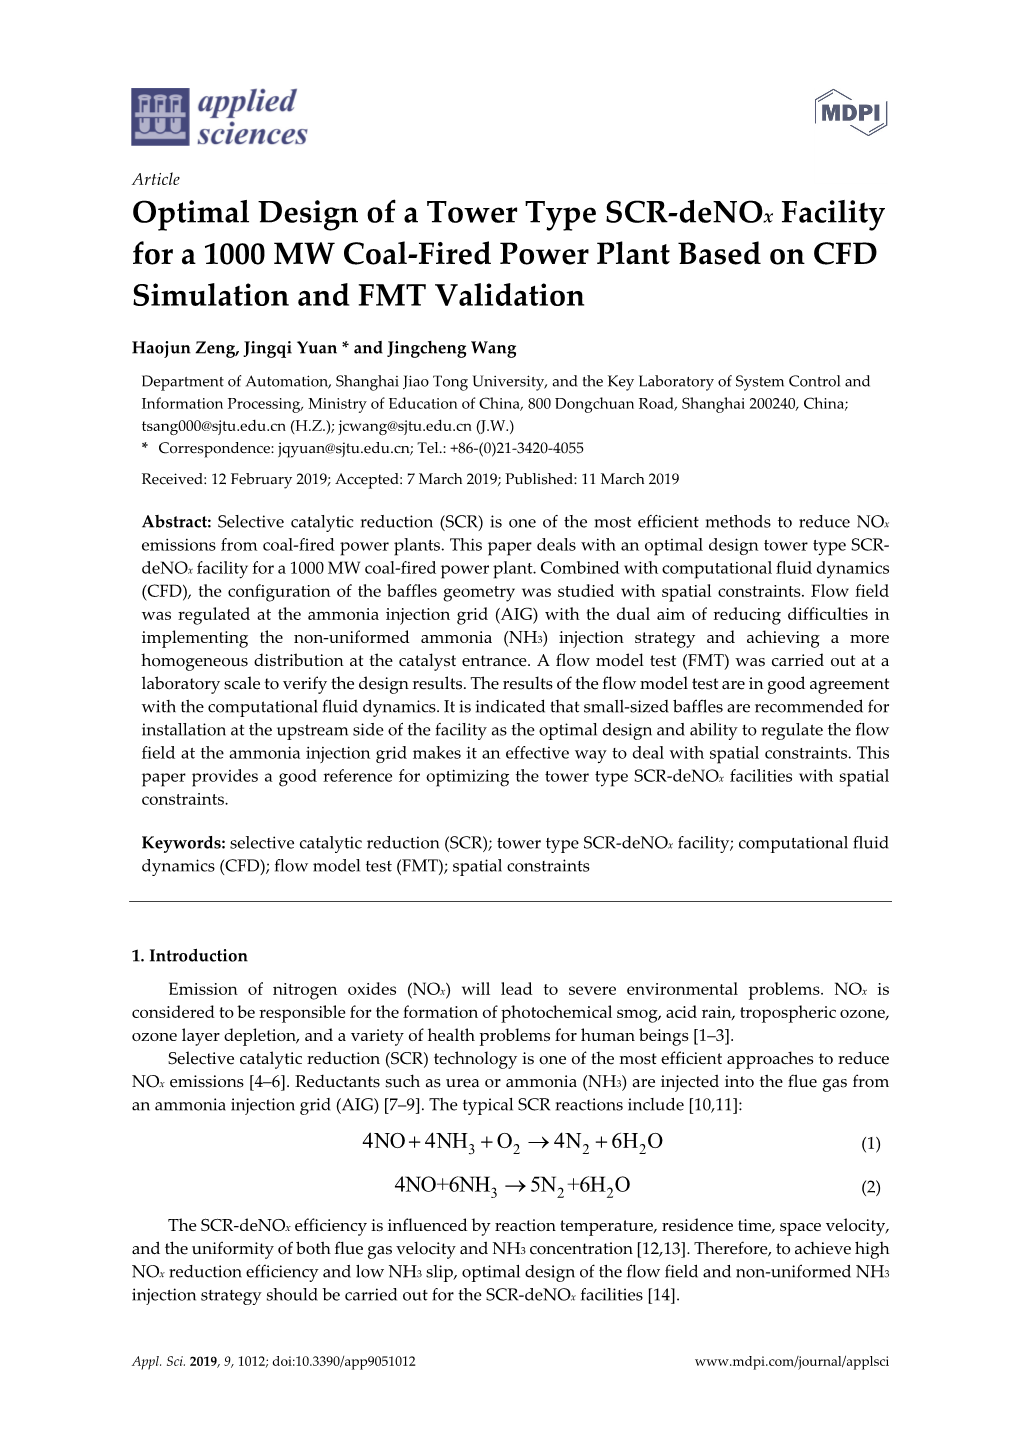 Optimal Design of a Tower Type SCR-Denox Facility for a 1000 MW Coal-Fired Power Plant Based on CFD Simulation and FMT Validation